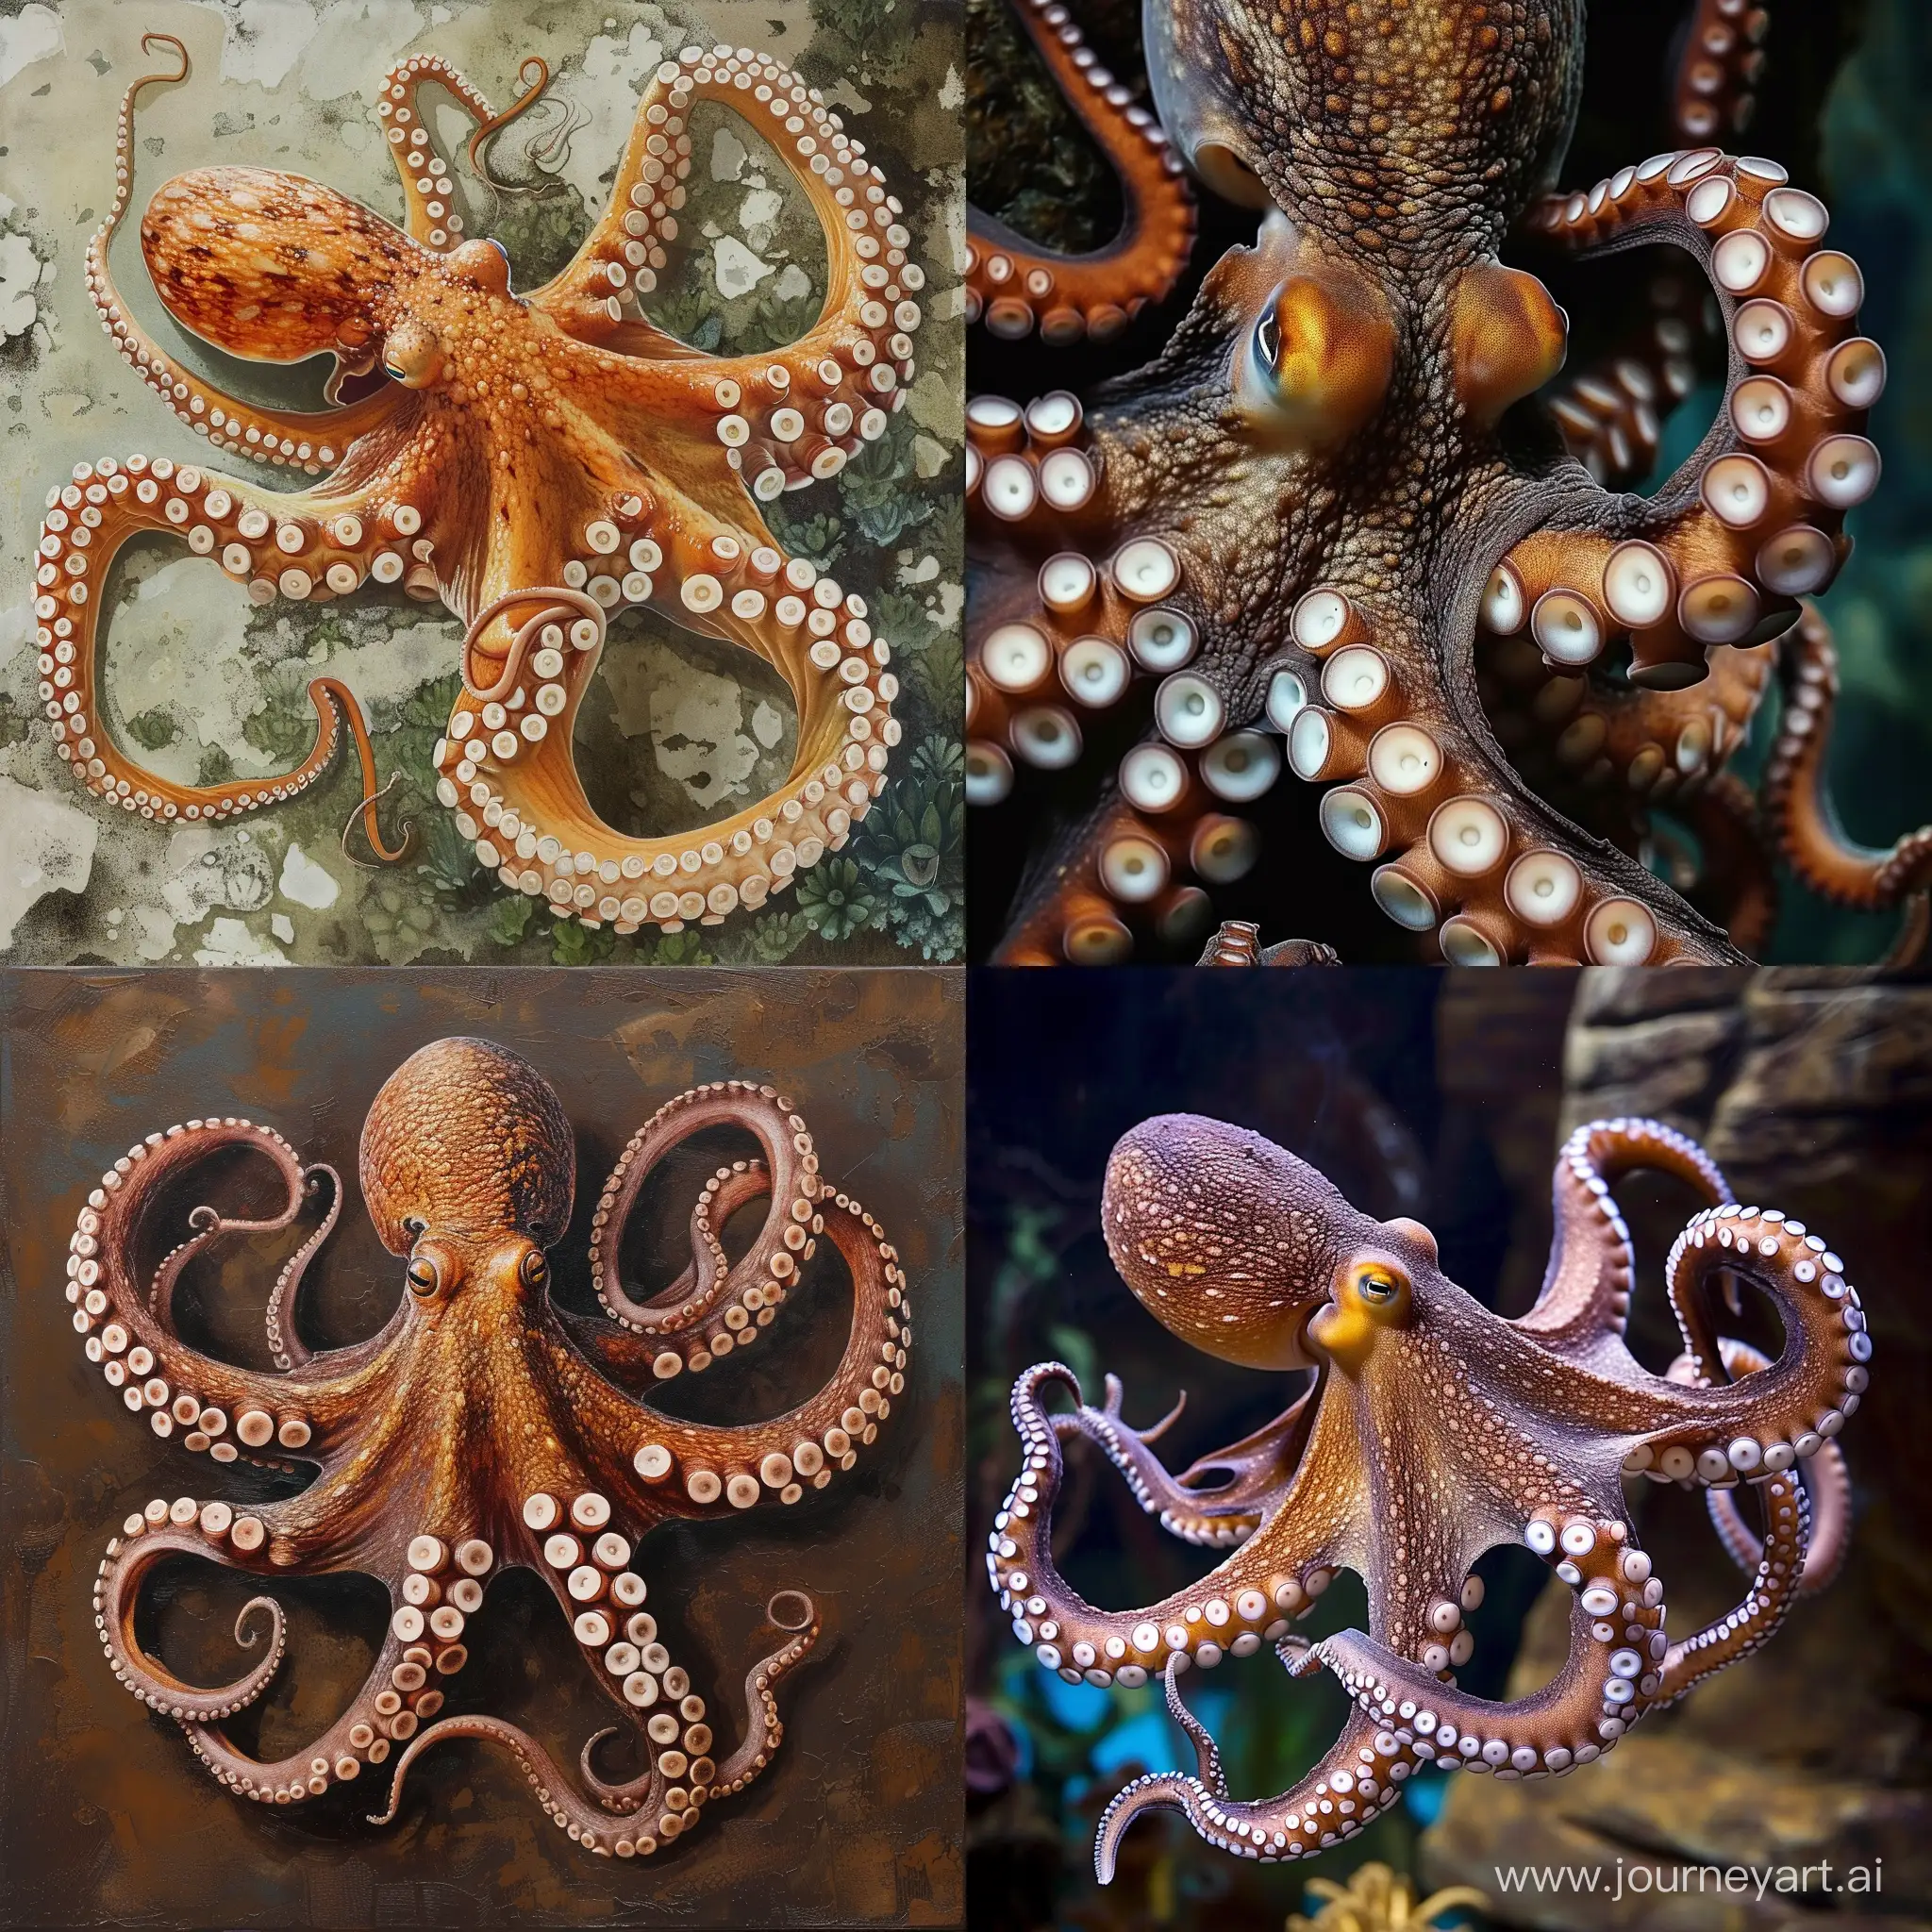 Vibrant-Octopus-Art-with-6-Tentacles-in-a-11-Aspect-Ratio-No-2148